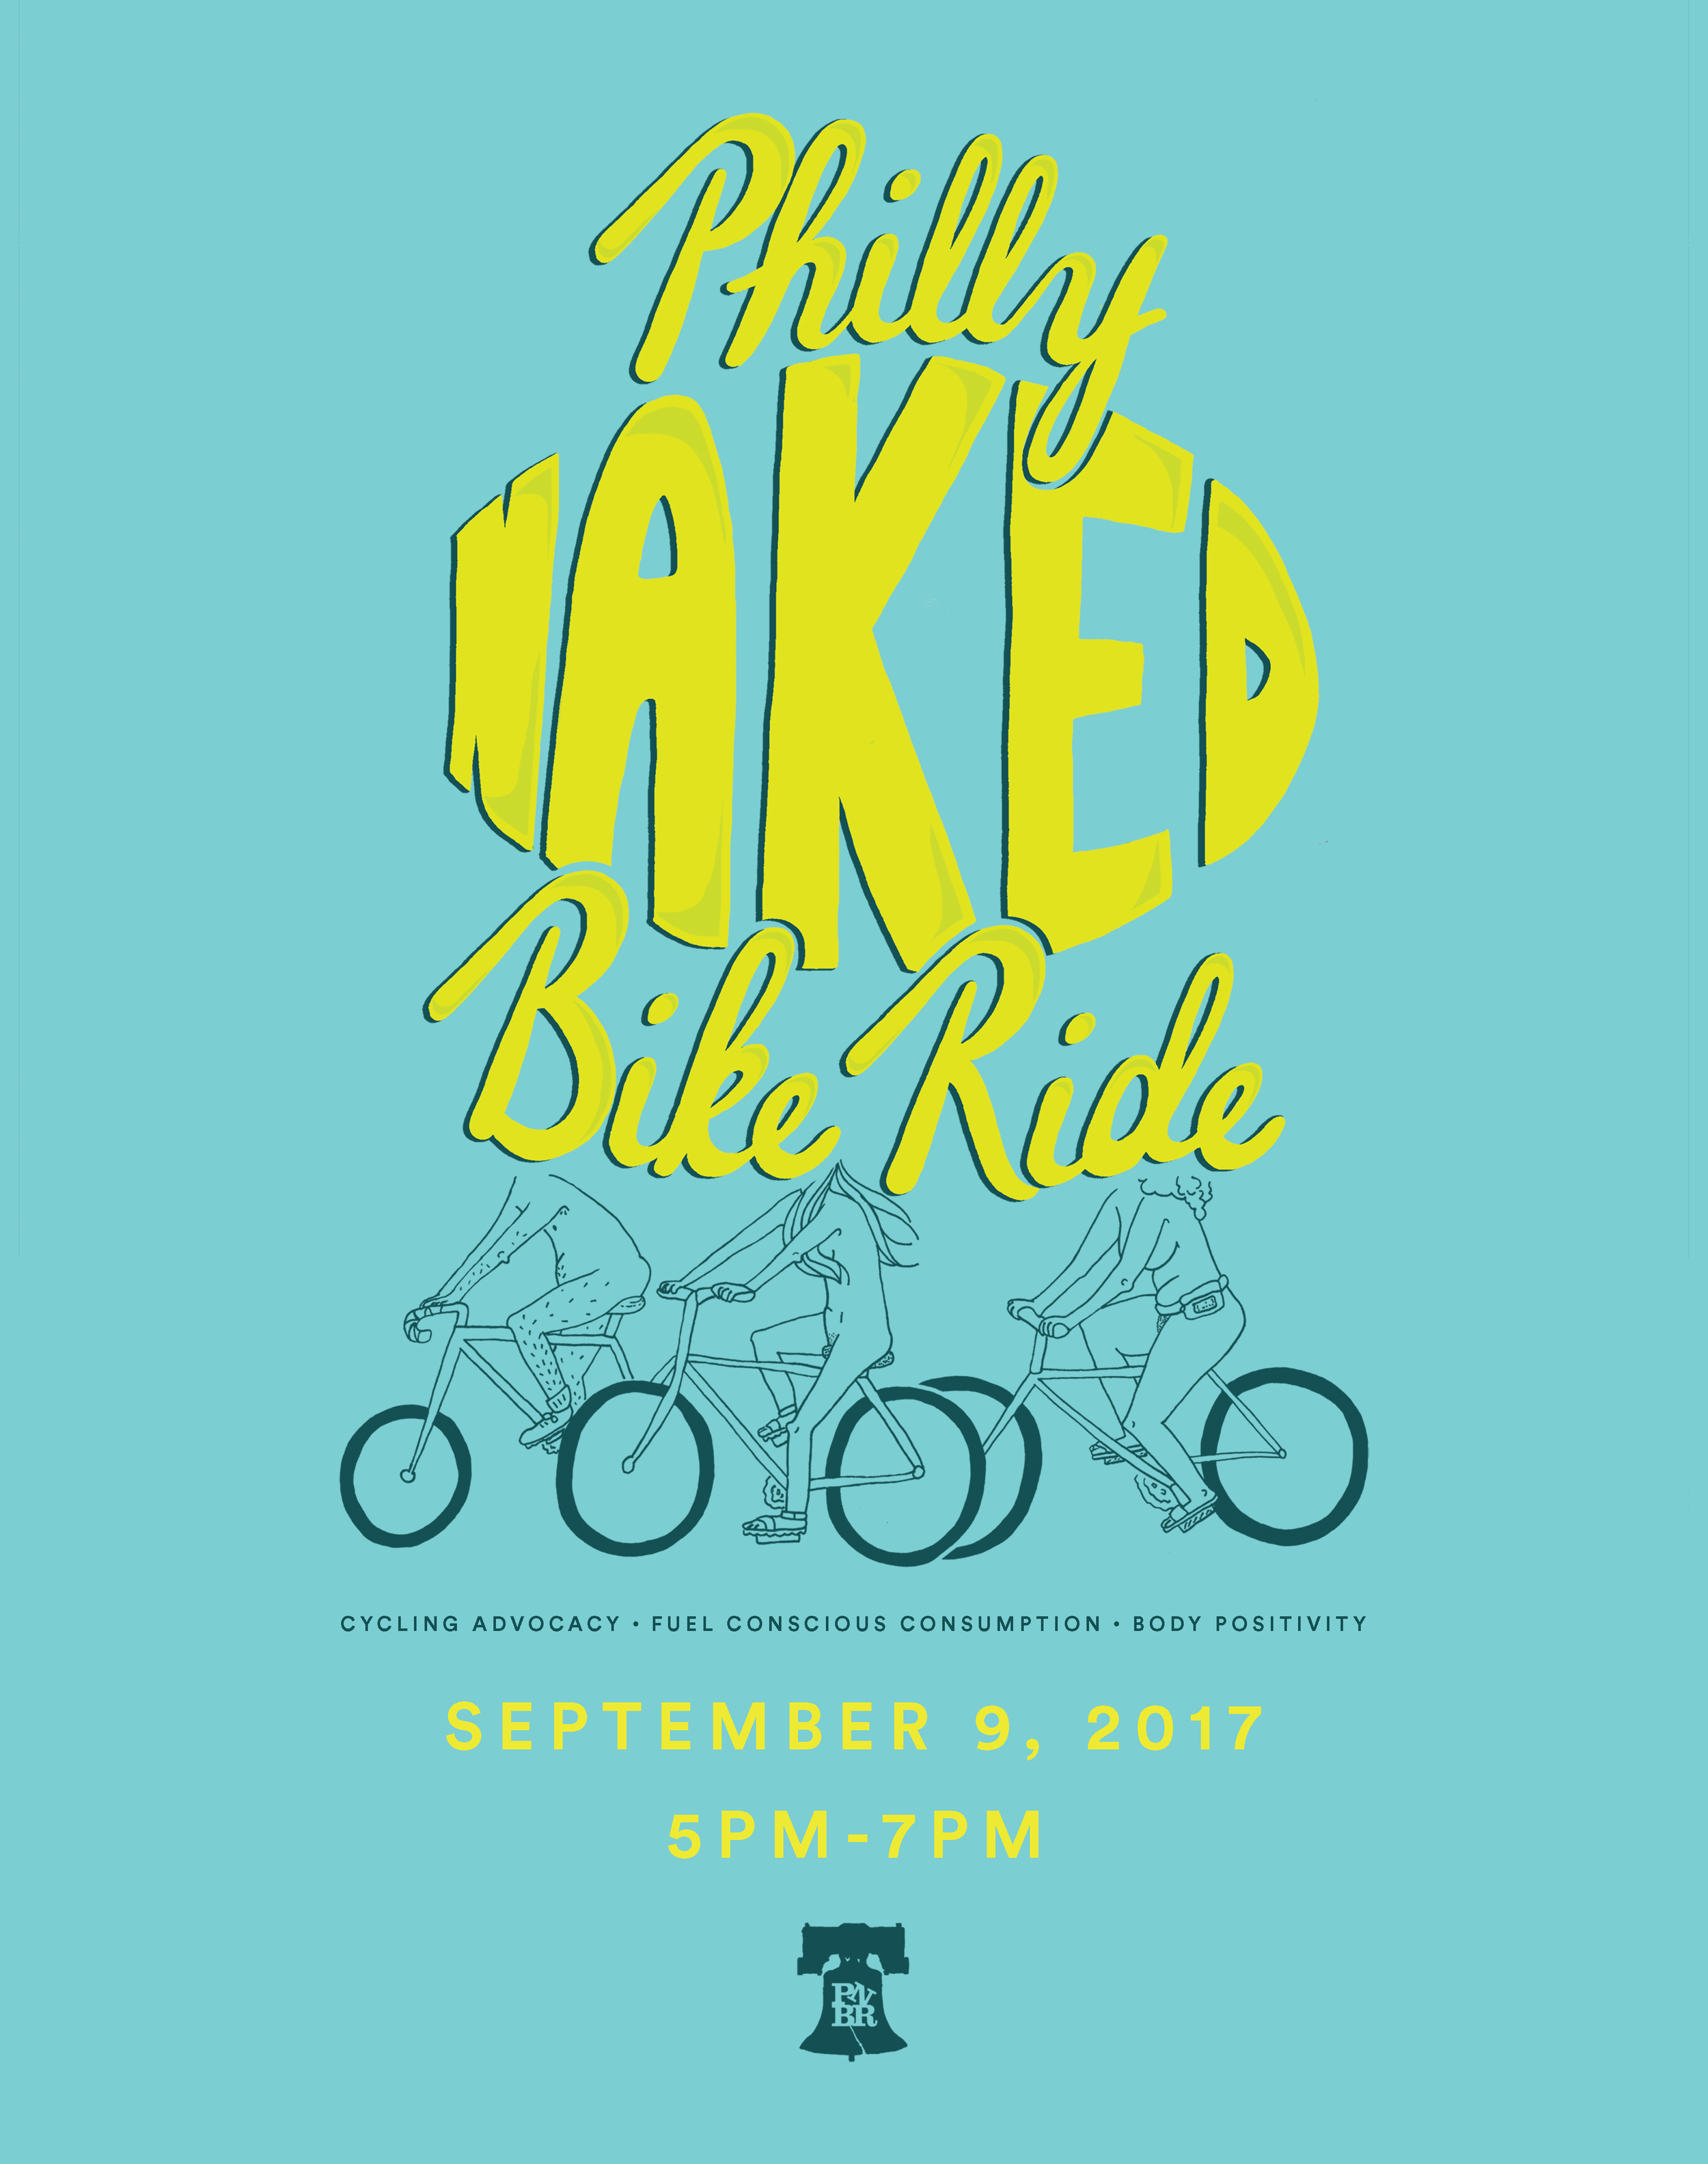 POSTER FOR PHILLY NAKED BIKE RIDE